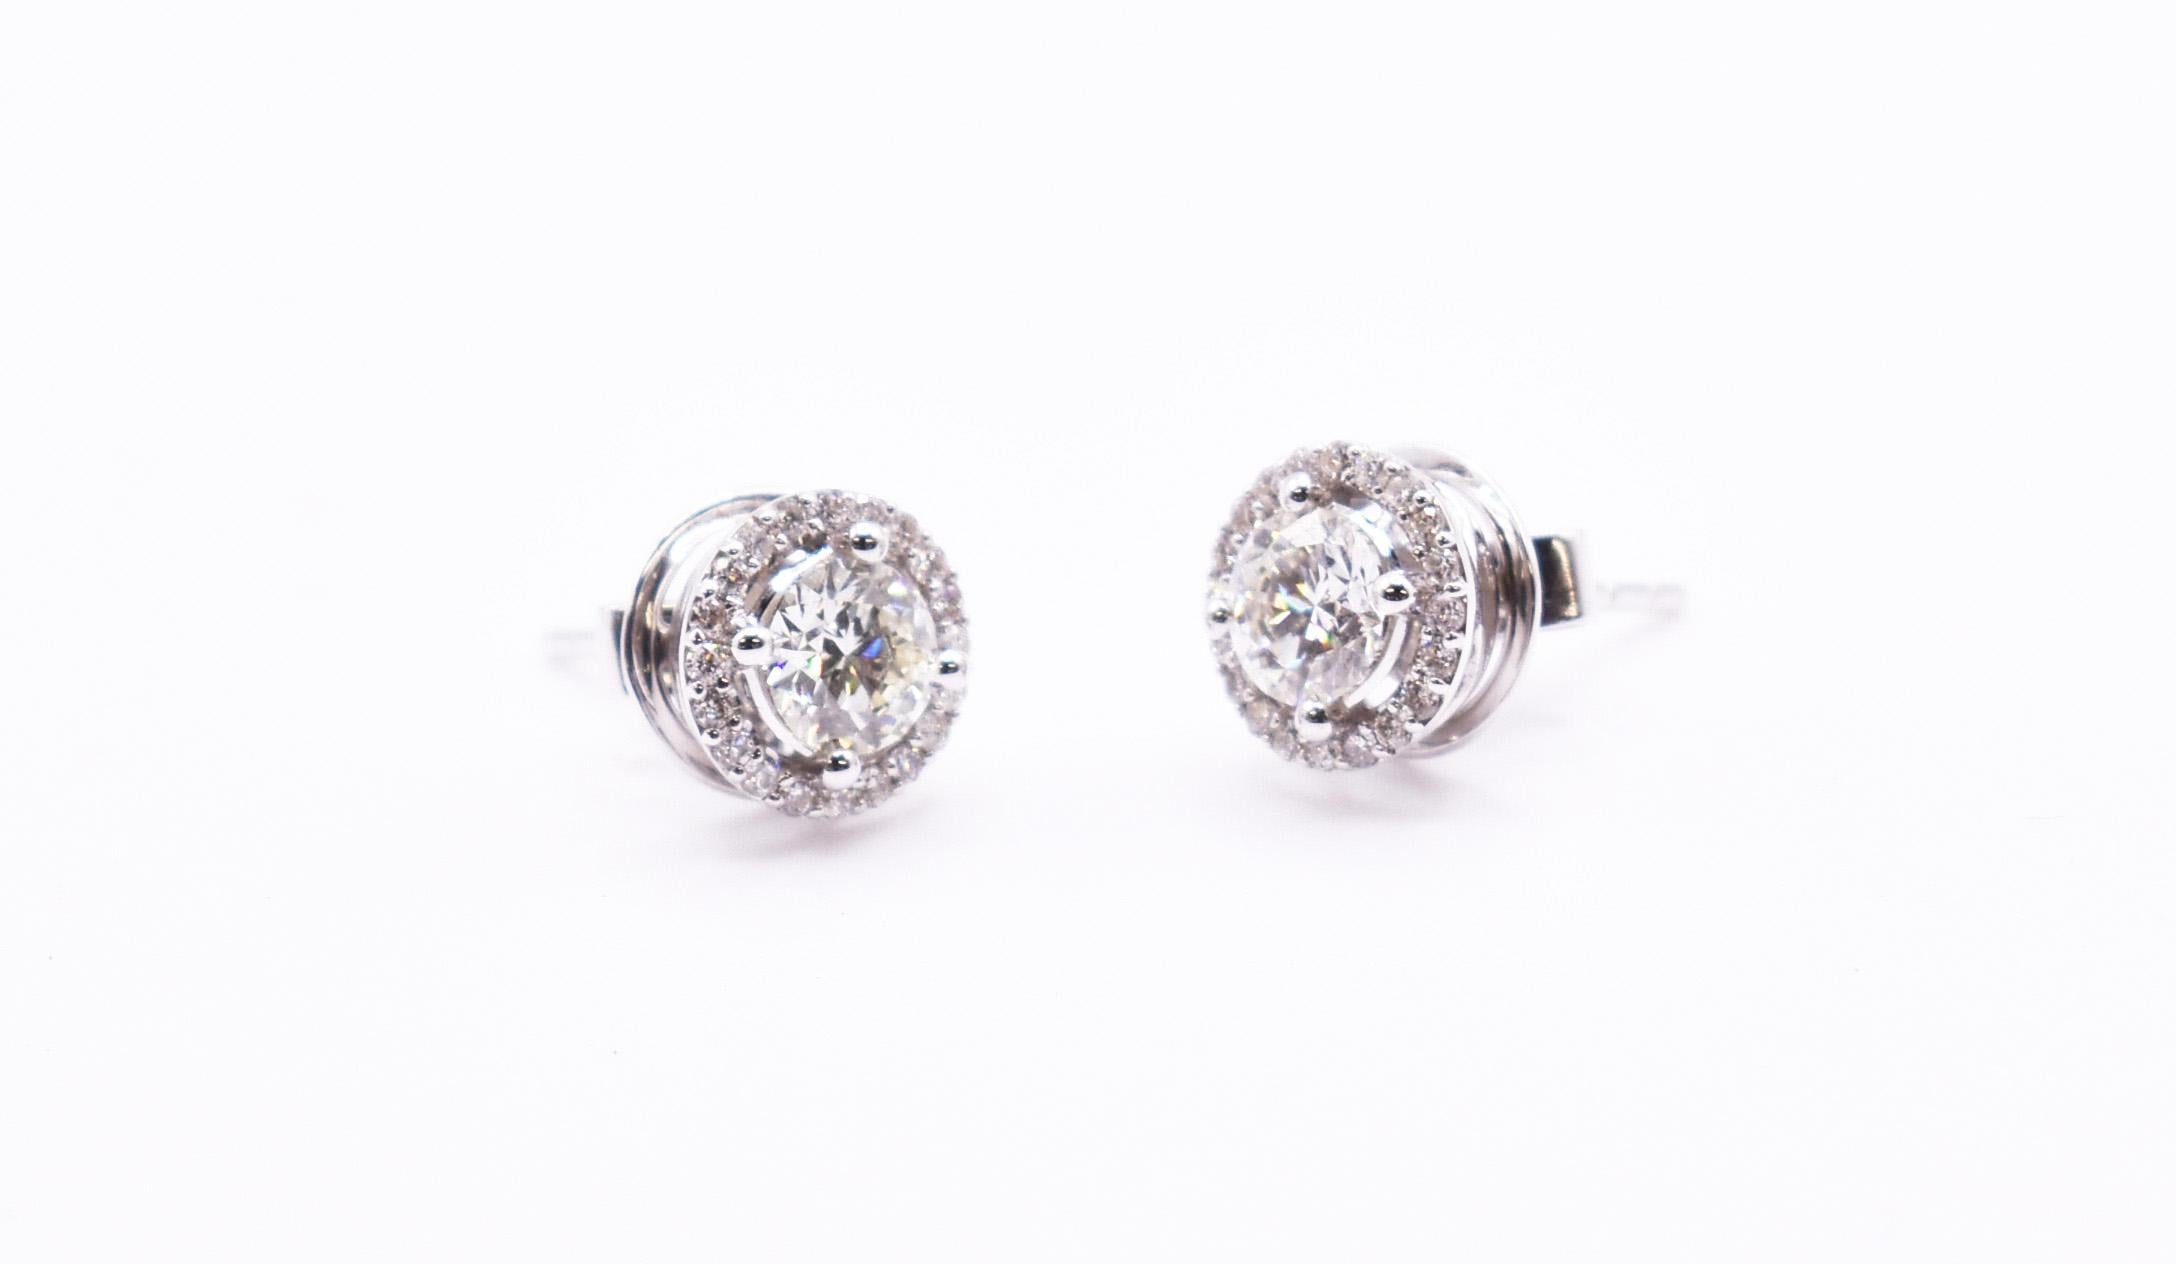 A splendid pair of 18 karat white gold diamond halo stud earrings featuring two bezel set round brilliant cut diamonds of SI1 clarity and I/J colour totaling 1.18 carats, surrounded by 18 prong set diamonds totaling an additional 0.25 carats. The